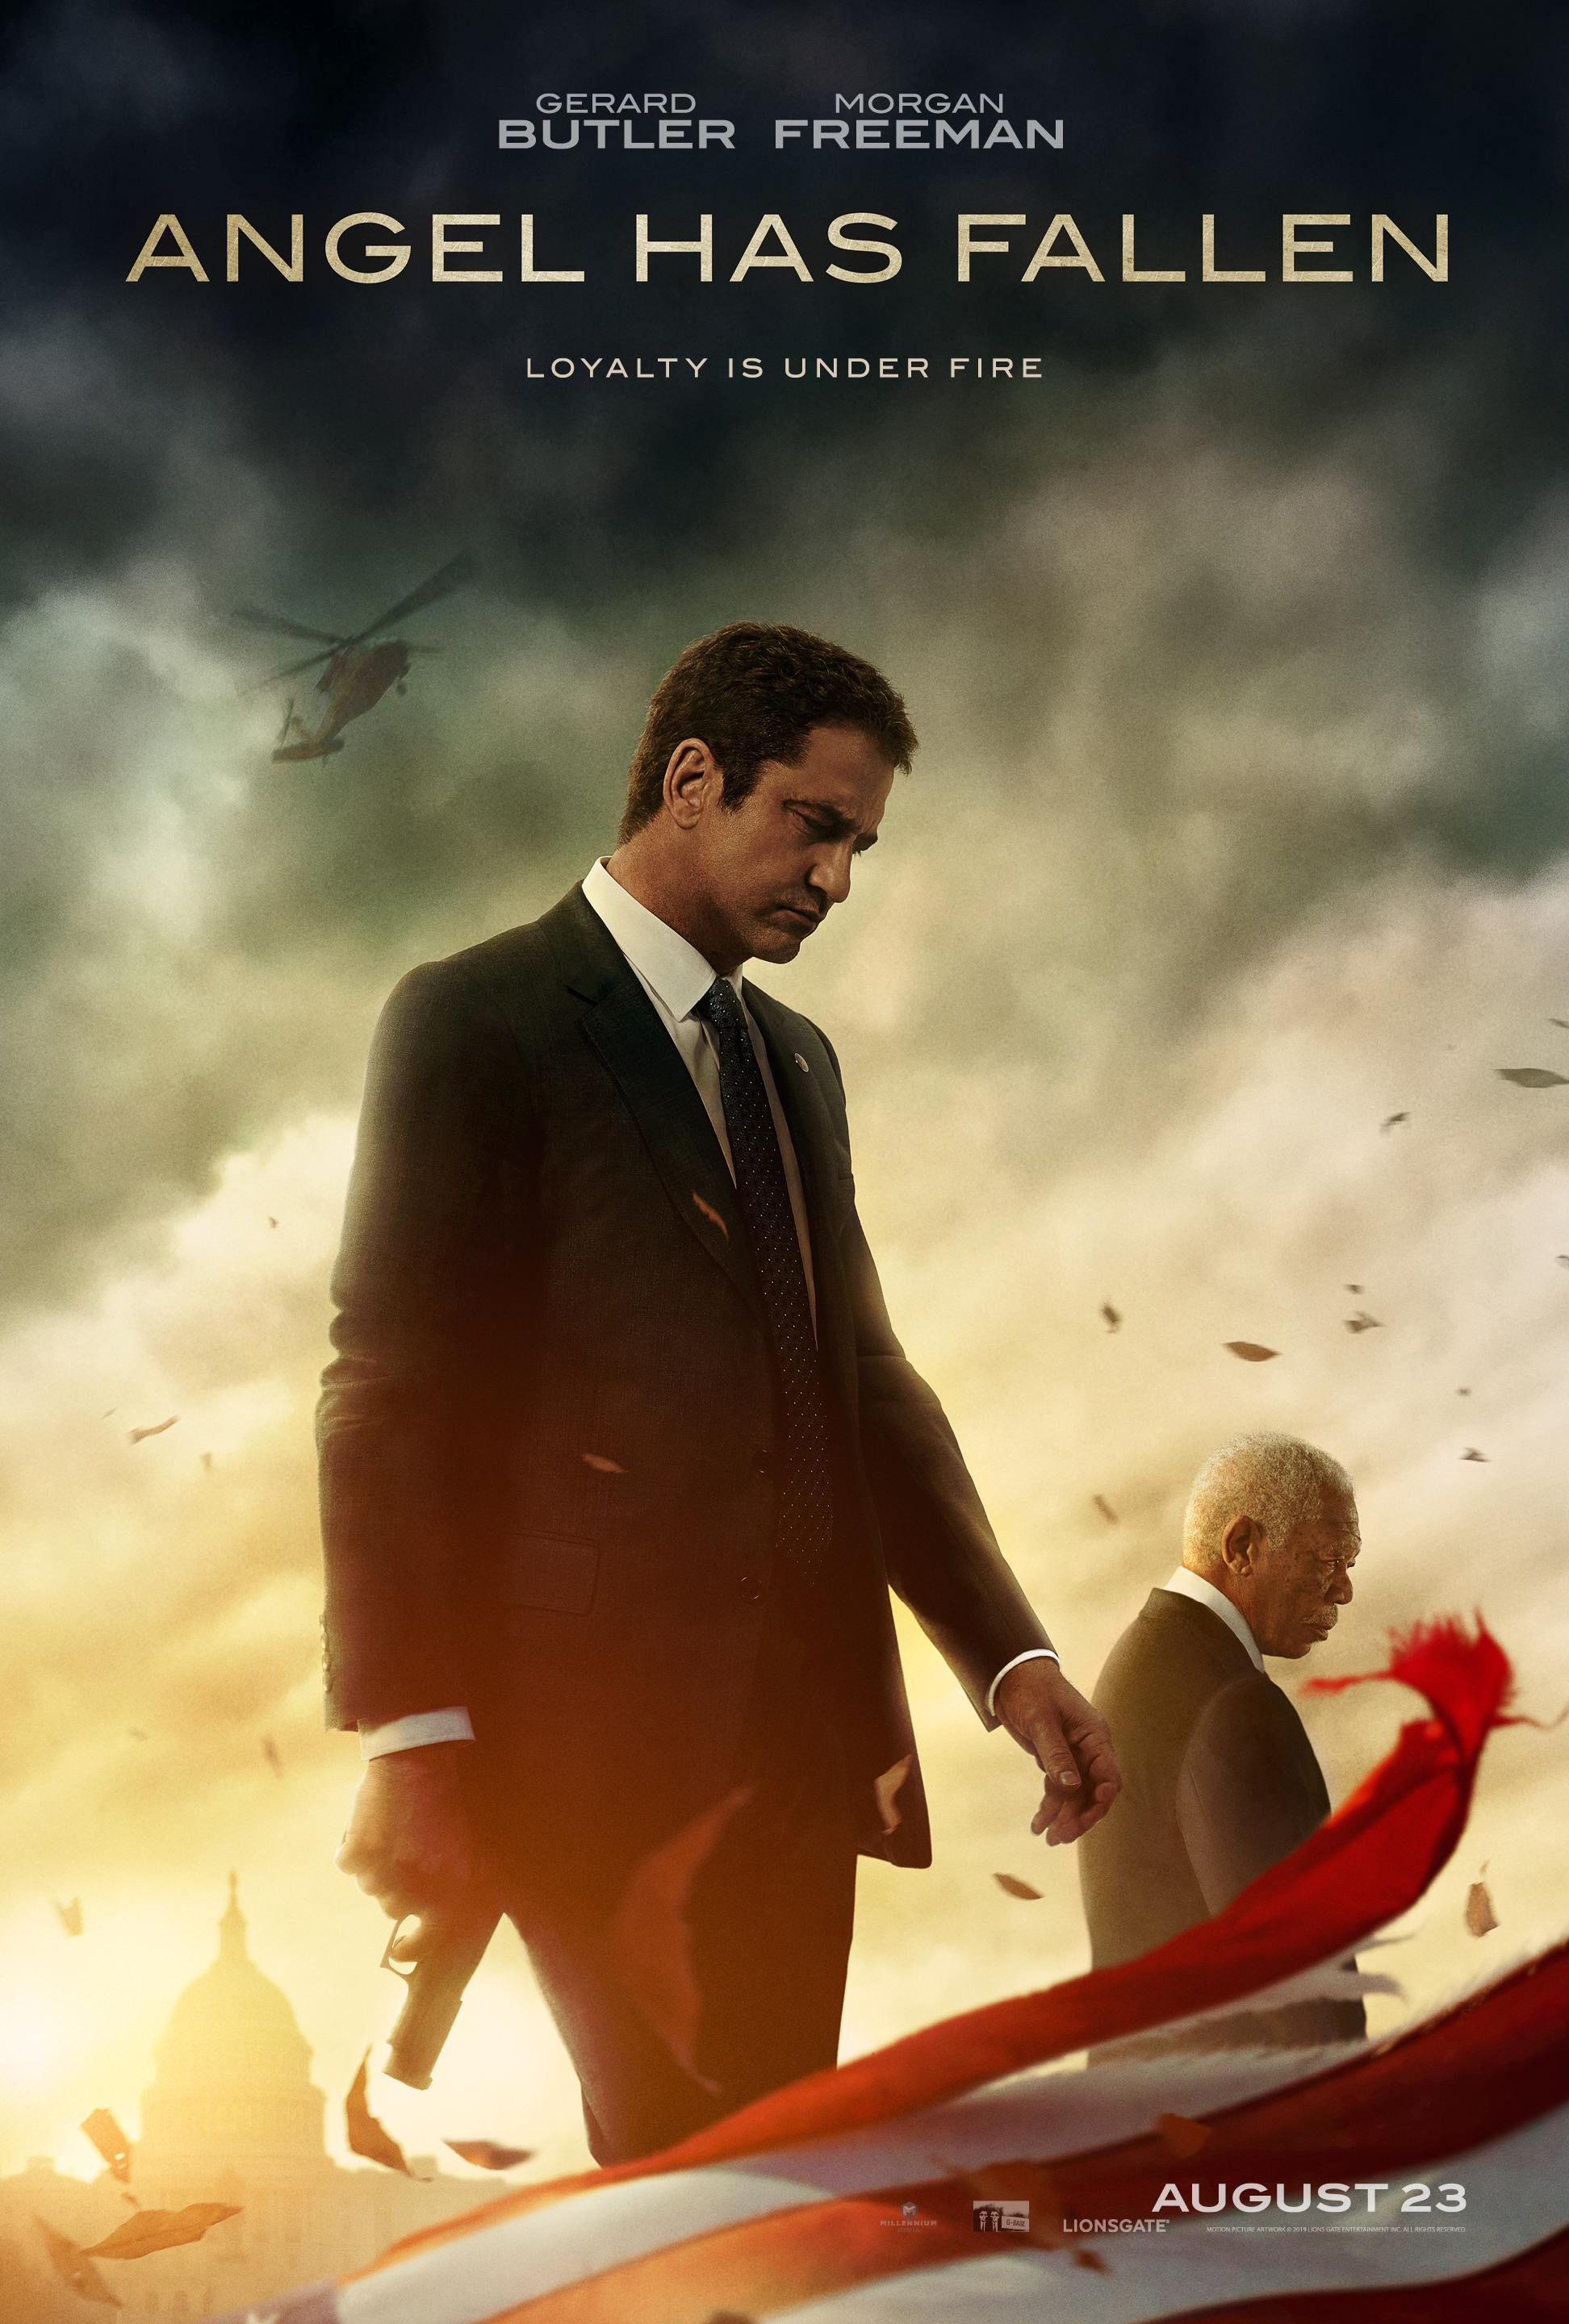 ANGEL HAS FALLEN trailer & poster – Gerard Butler and Morgan Freeman are back in action